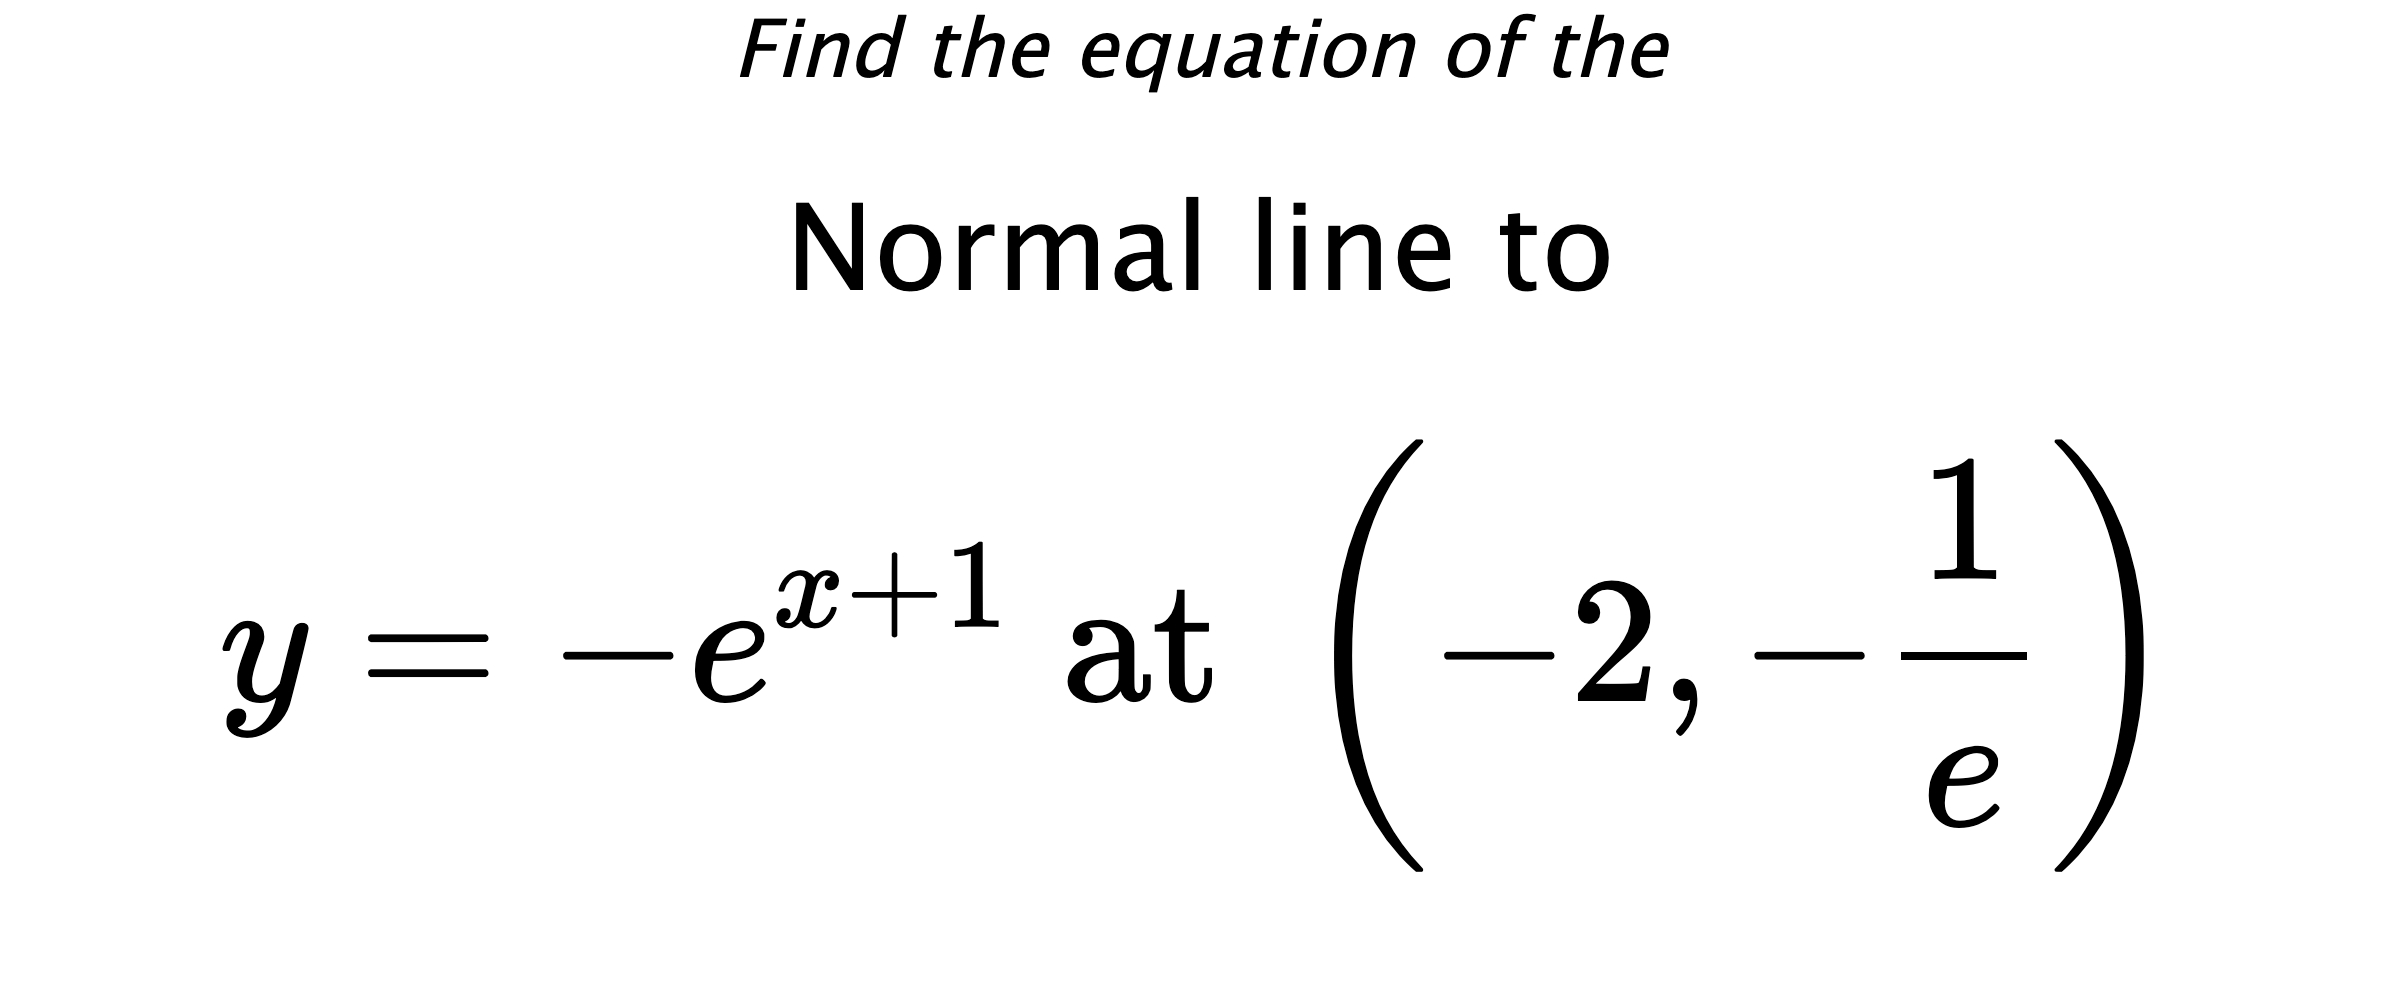 Find the equation of the Normal line to $$ y=-e^{x+1} \text{ at } \left(-2,-\frac{1}{e}\right) $$